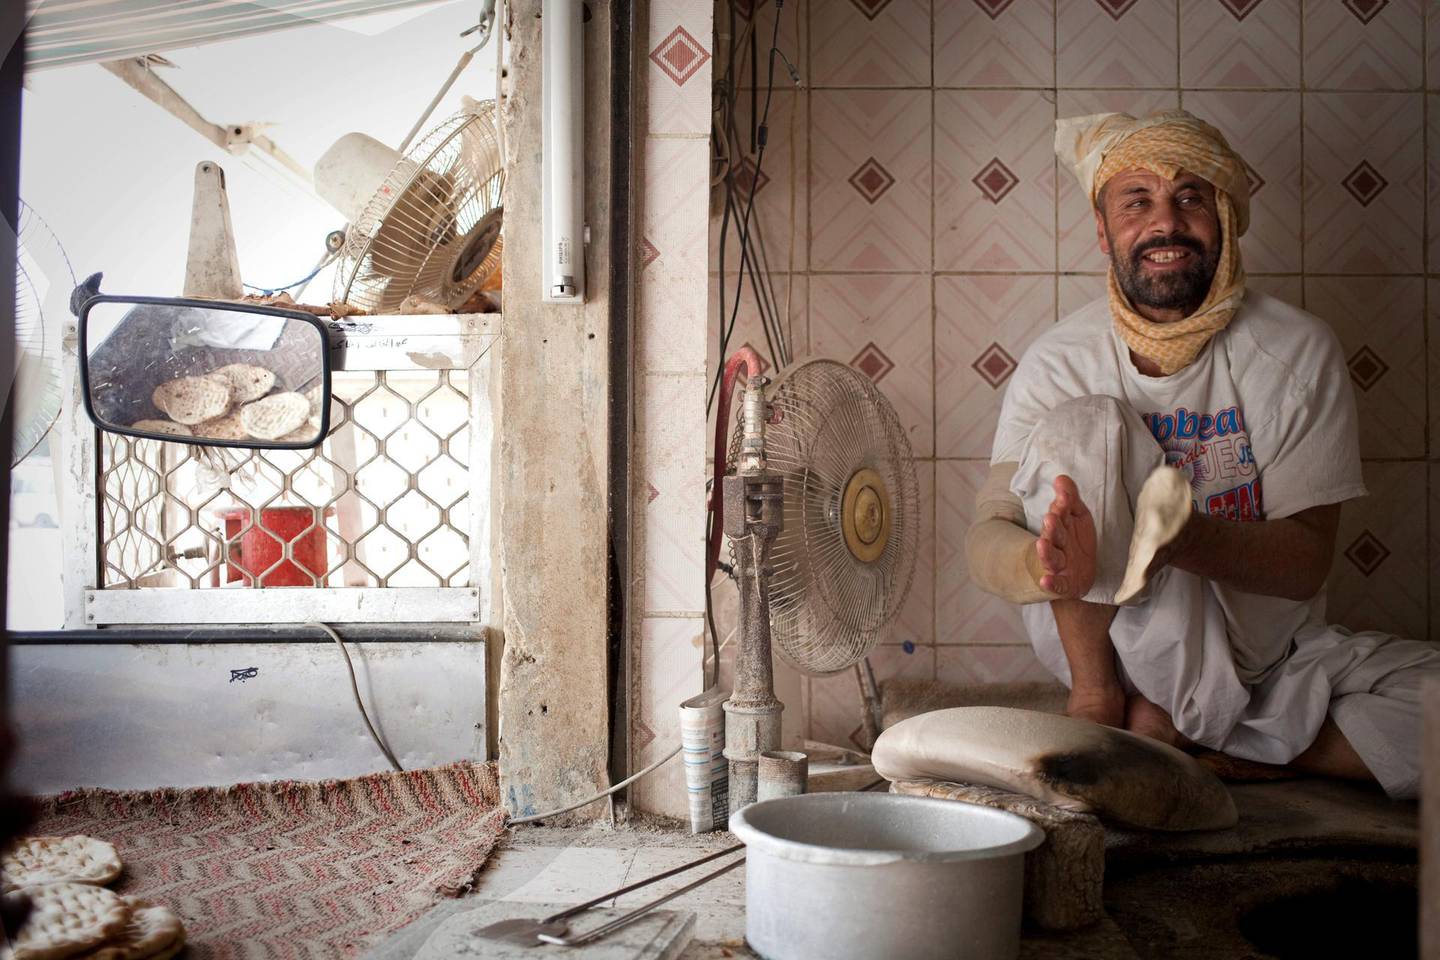 Dubai, United Arab Emirates - August 22 2013 - Sayed Gul,32, bakes Afghani bread at the Ibrahim Al Nubi Ali Bakery in Safa Al Qouz residential area of Dubai for residents of that area. He has been living in the UAE for two years. Tags: STANDALONE (Razan Alzayani / The National) *** Local Caption ***  RA0922_ibrahim_bakery_003.jpg